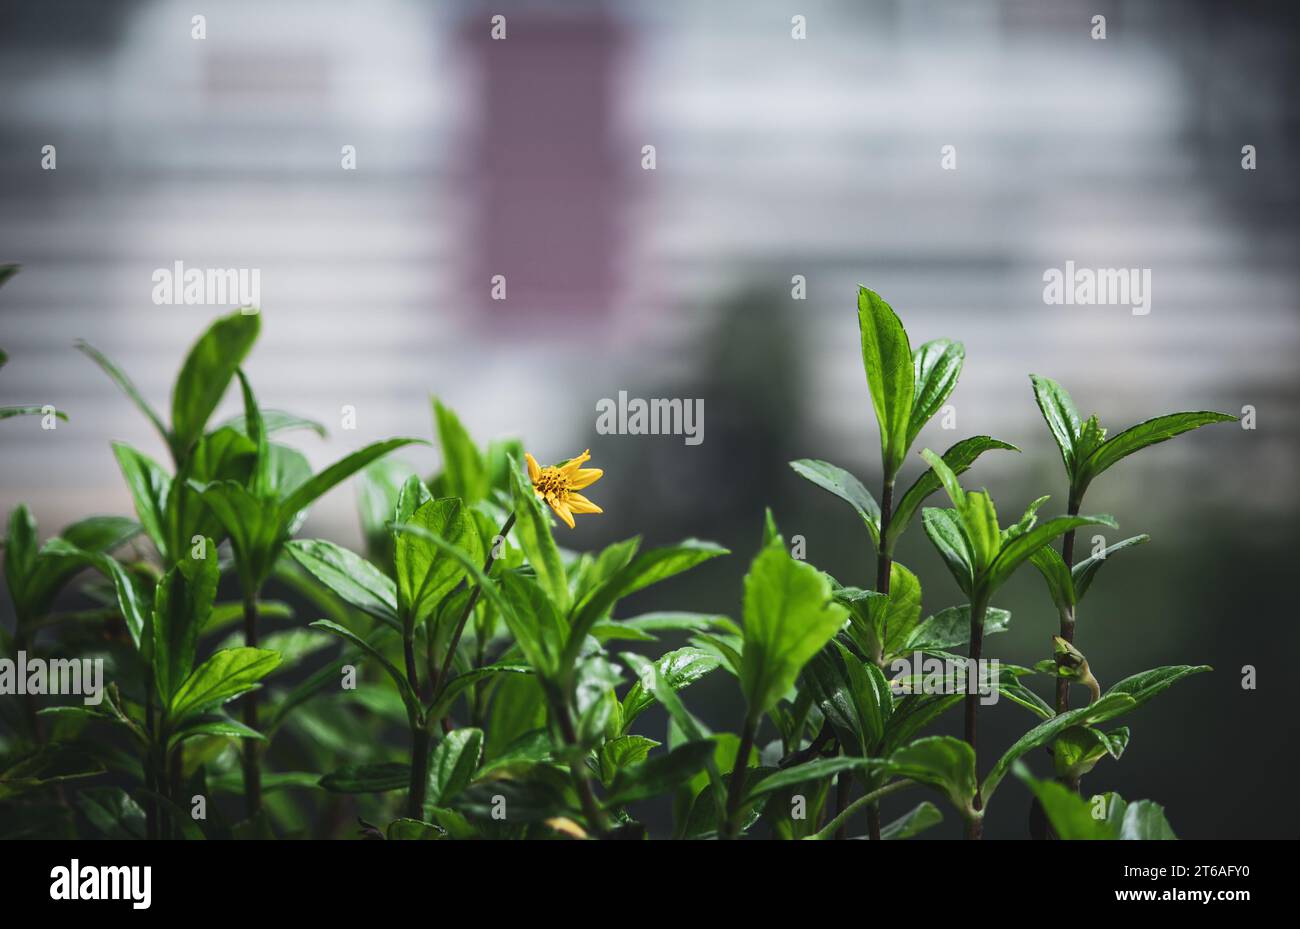 View of plants in foreground along the Genting Highlands, Malaysia Stock Photo